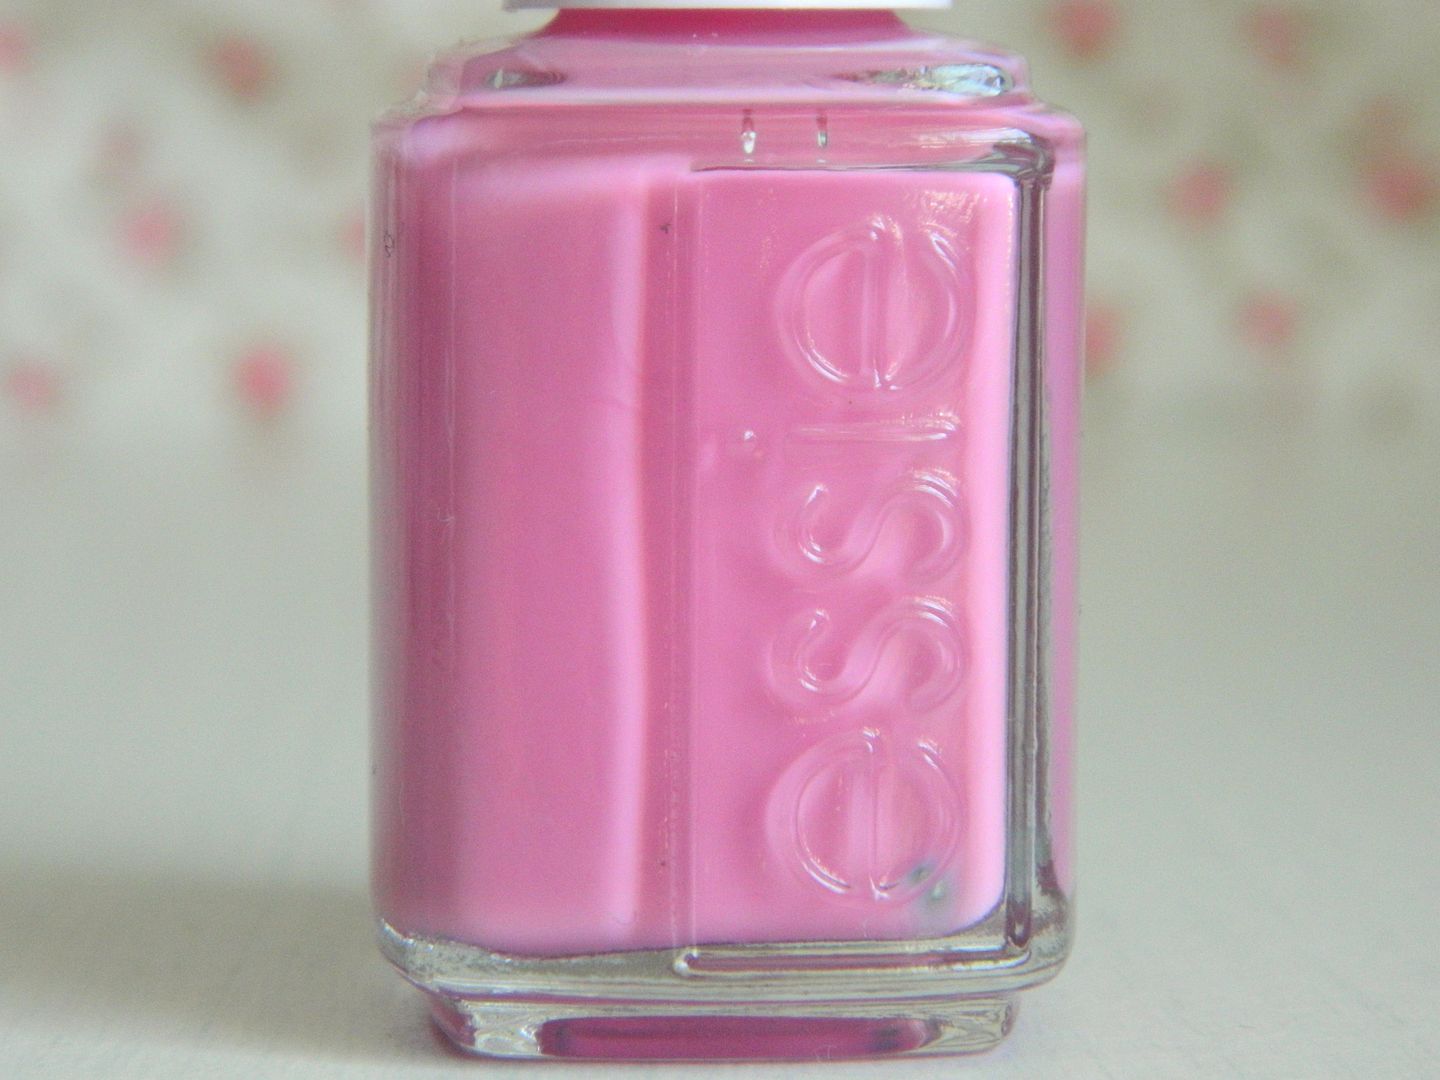 Nails Of the Day Essie Nail Lacquer Cascade Cool Close Up Belle-amie UK Beauty Fashion Lifestyle Blog